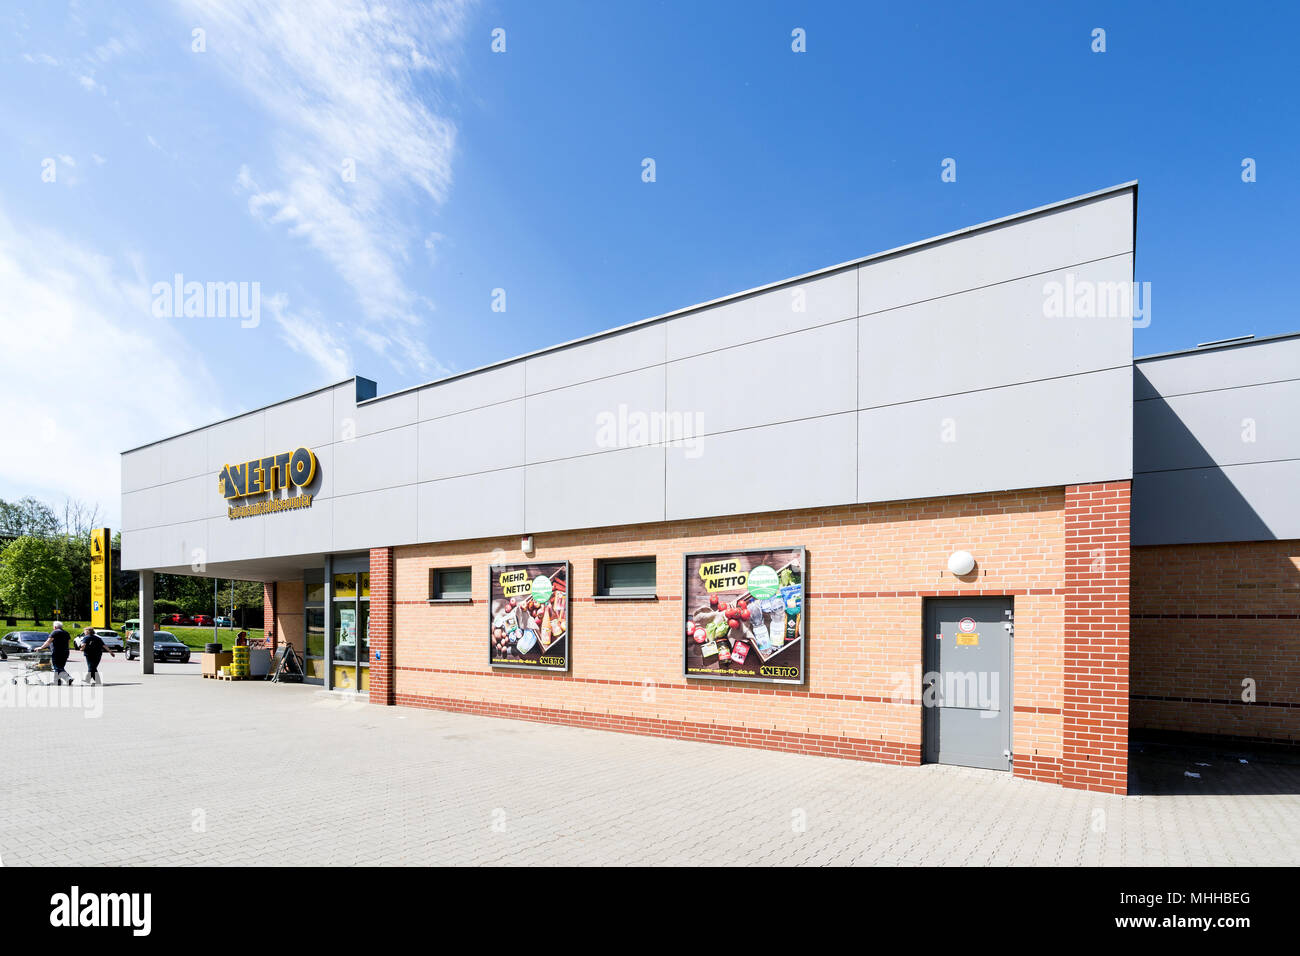 Netto Lebensmitteldiscounter branch in Limbach-Oberfrohna, D. Netto is a Danish discount supermarket operating in Denmark, Germany, Poland and Sweden. Stock Photo